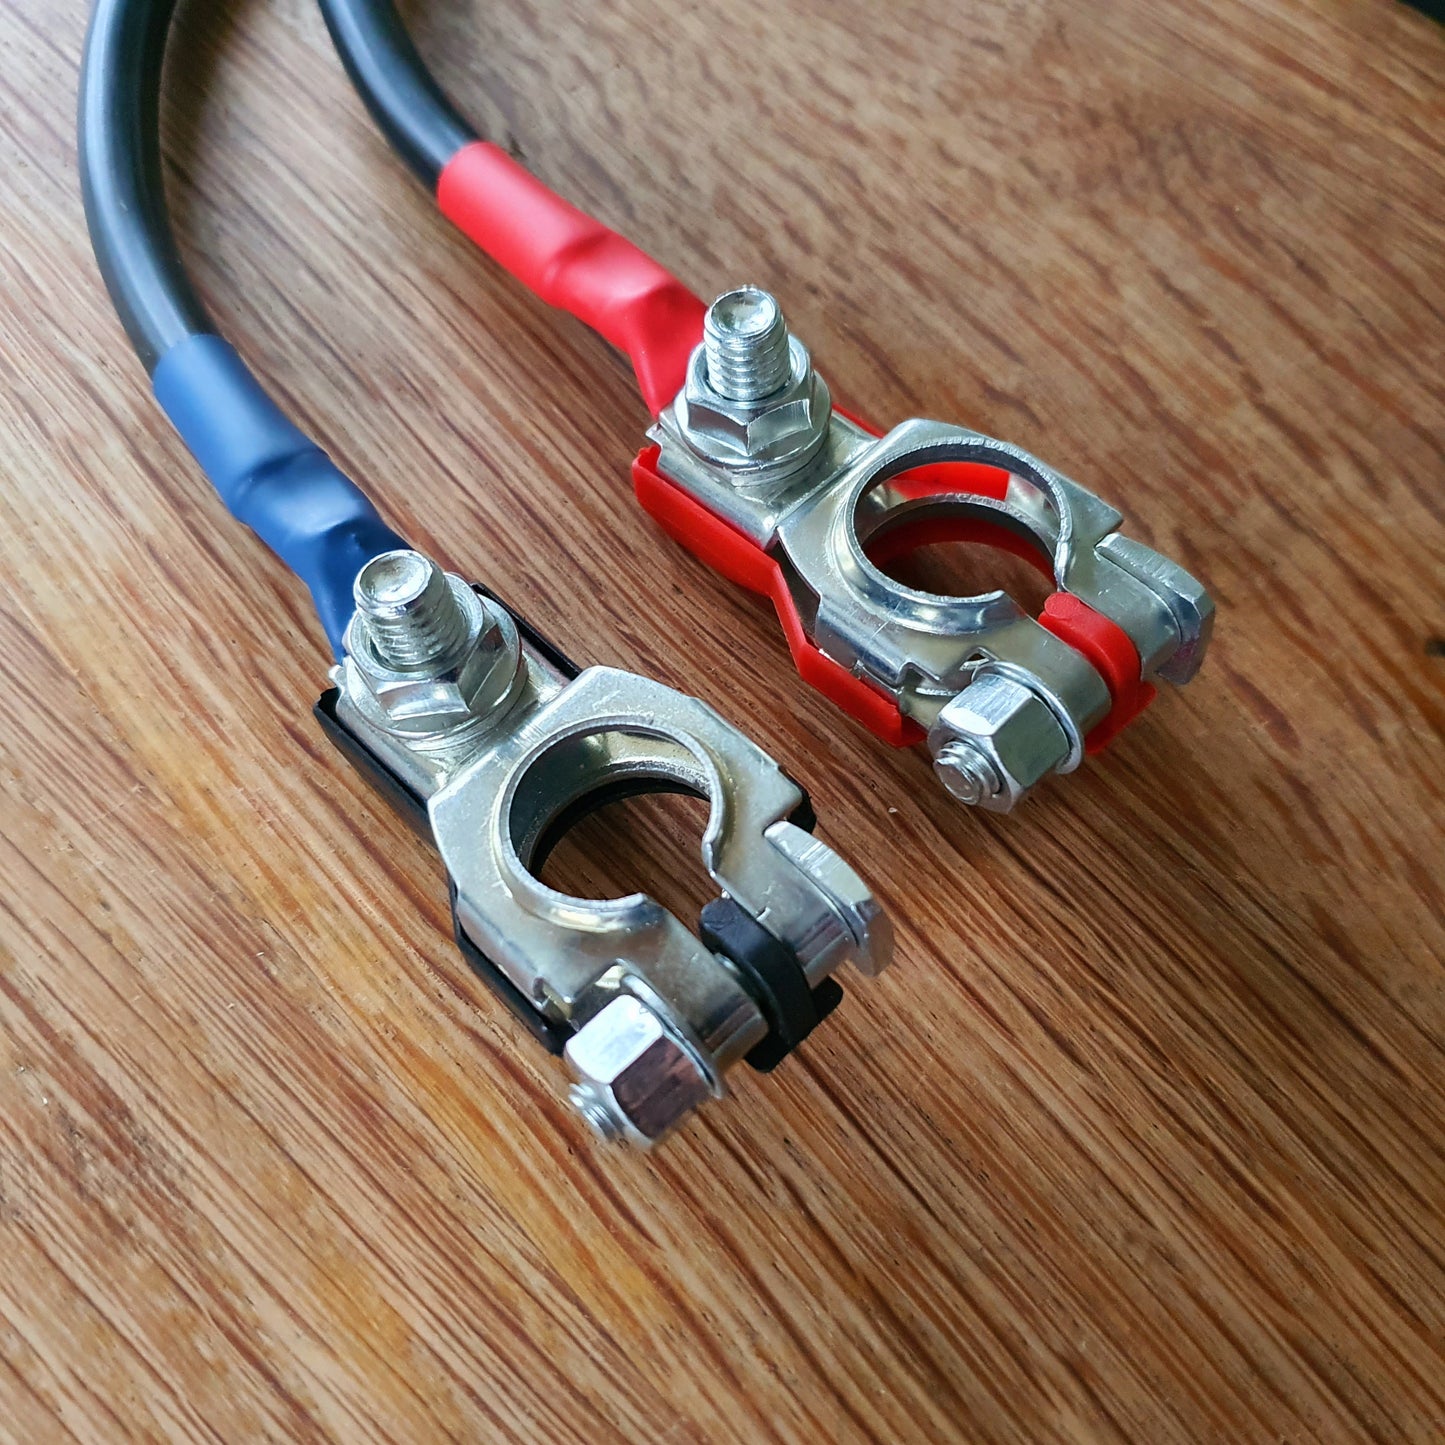 Leisure Battery Parallel Connection Cables 16mm2 Four Way